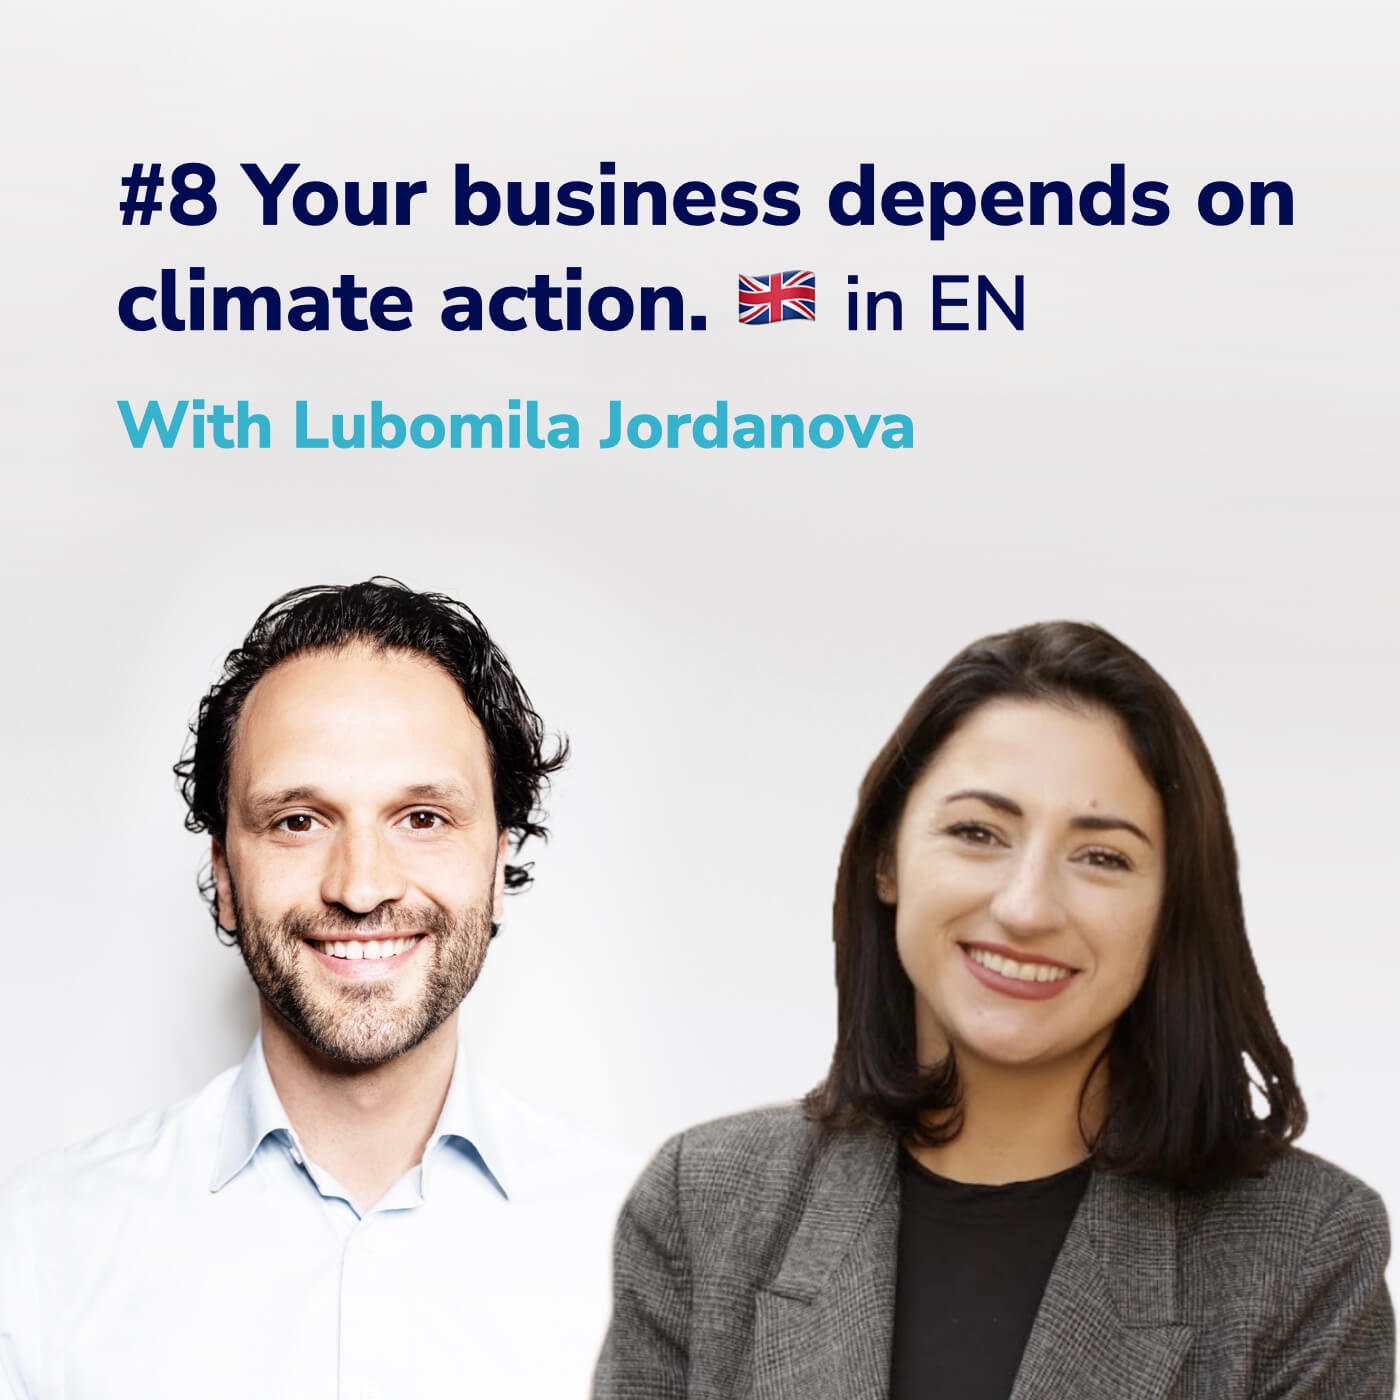 #8 Your business depends on climate action - Lubomila Jordanova I in EN 🇬🇧